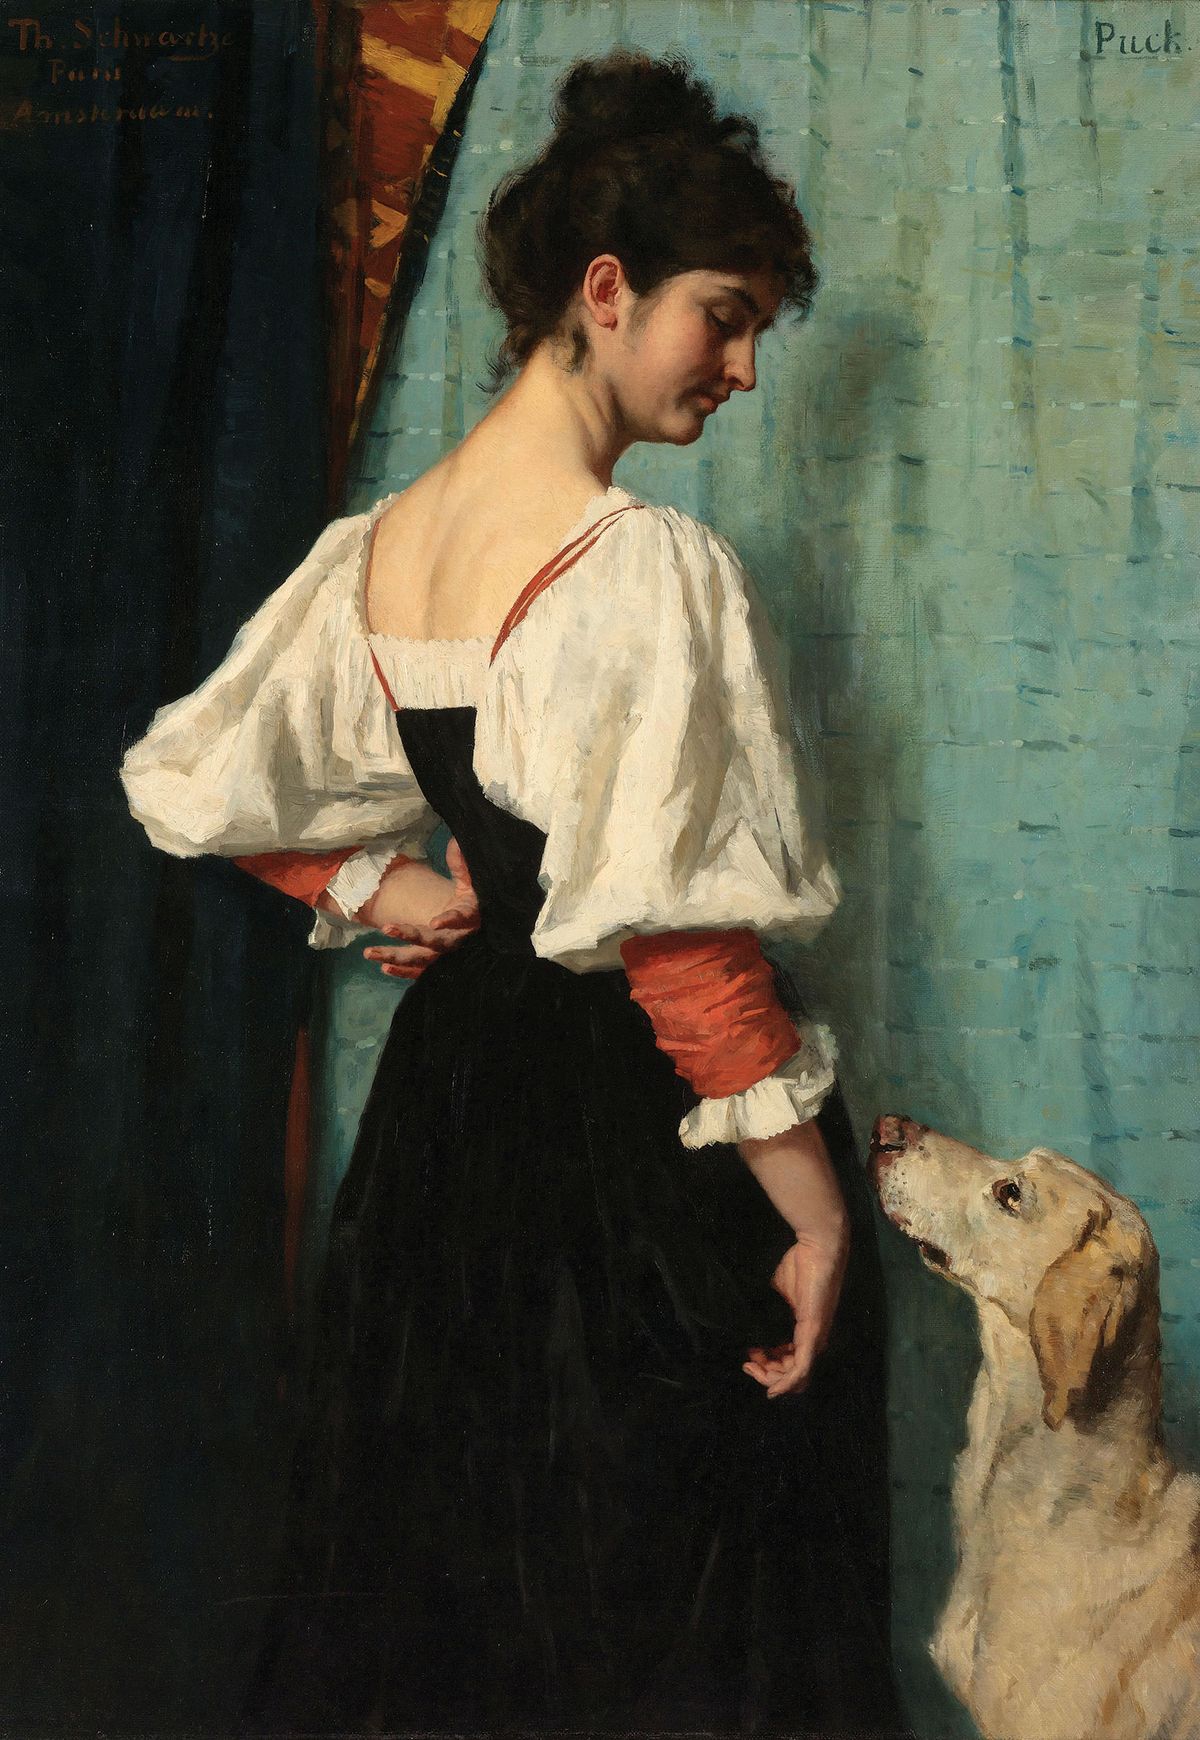 Thérèse Schwartze, Portrait of a Young Woman with ‘Puck’ the Dog (around 1884-85) Courtesy of Rijksmuseum Amsterdam